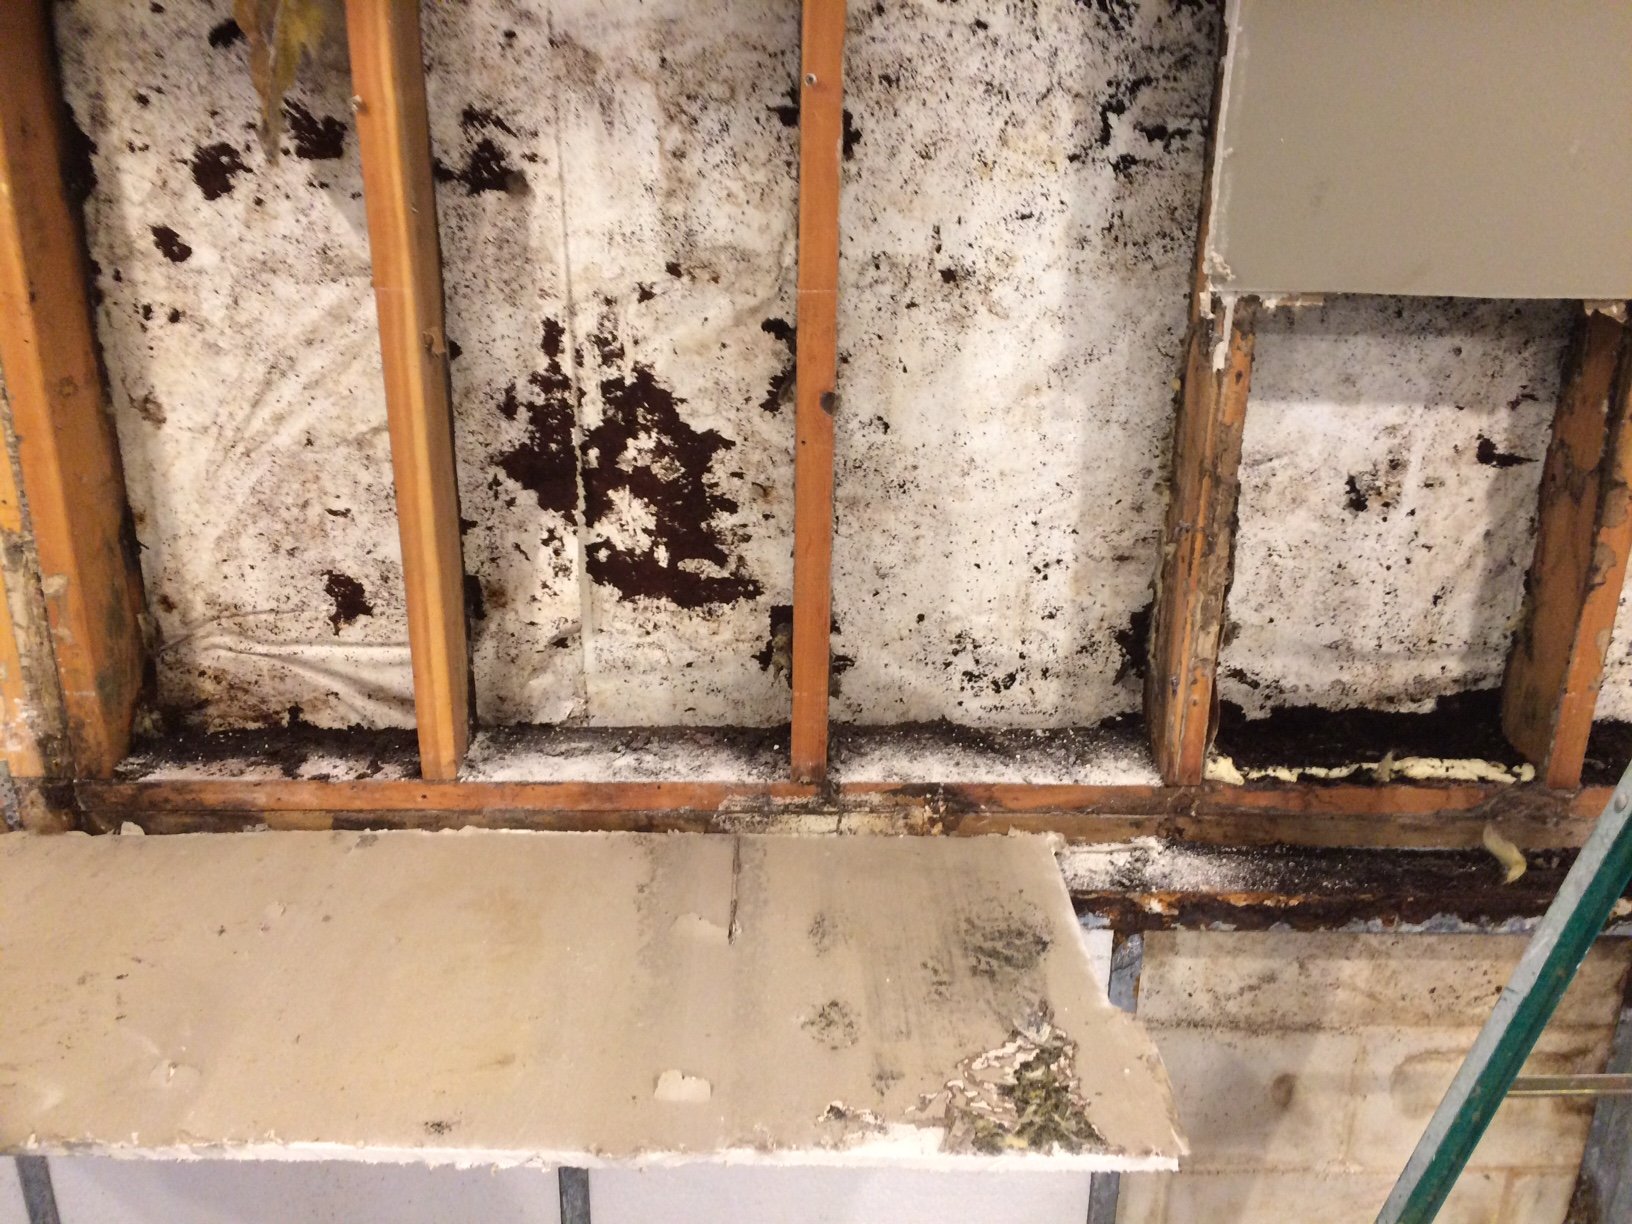 Mold Testing & Mold Inspections